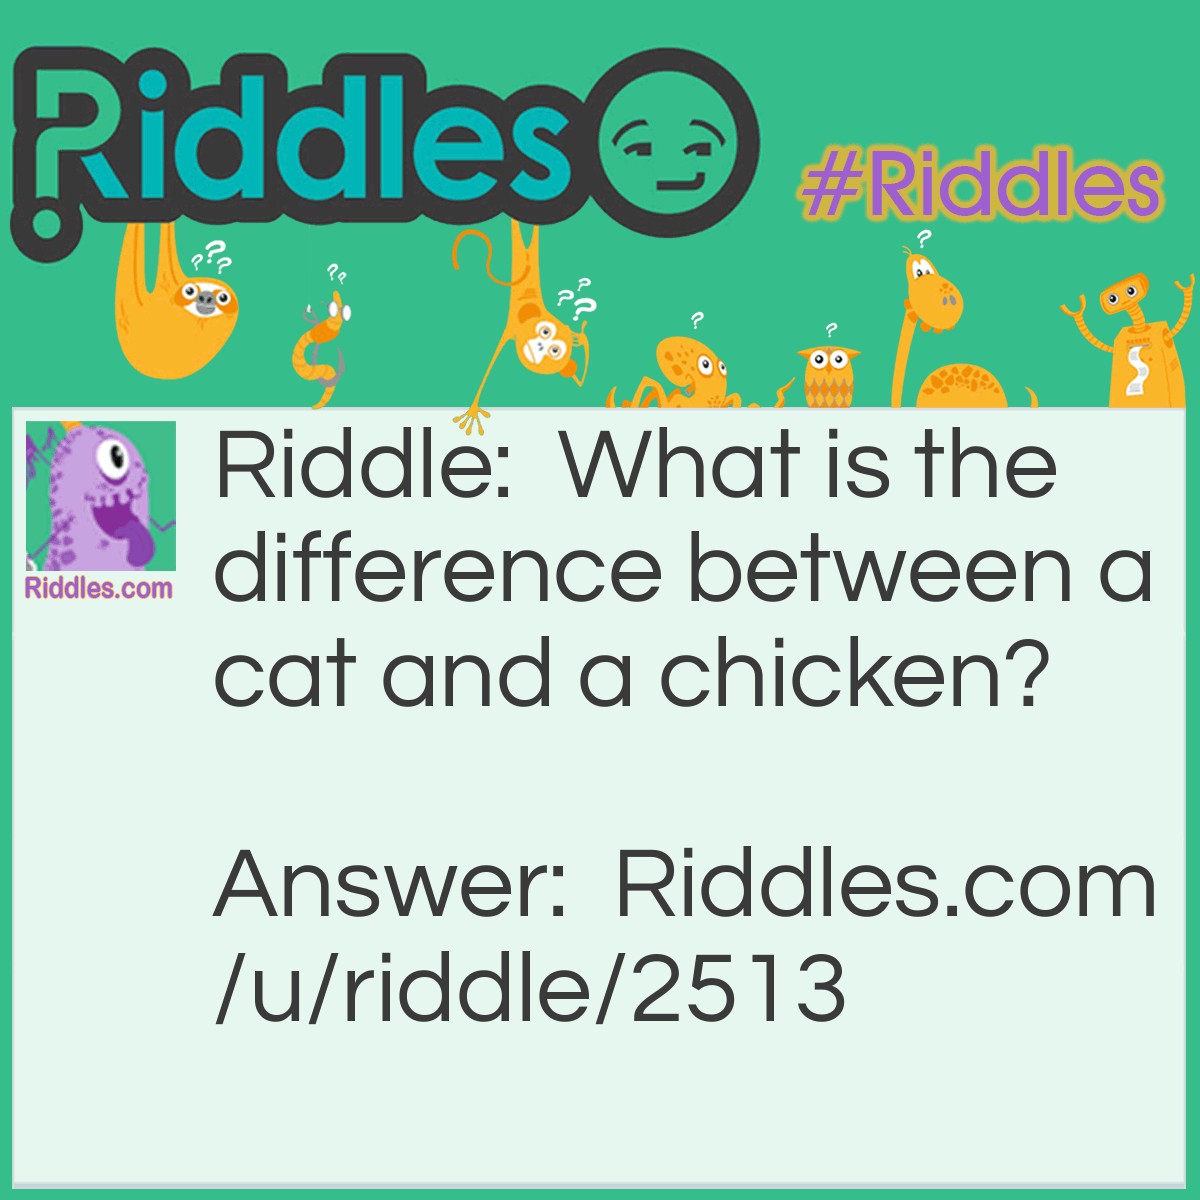 Riddle: What is the difference between a cat and a chicken? Answer: A cat doesn't go cluck cluck!